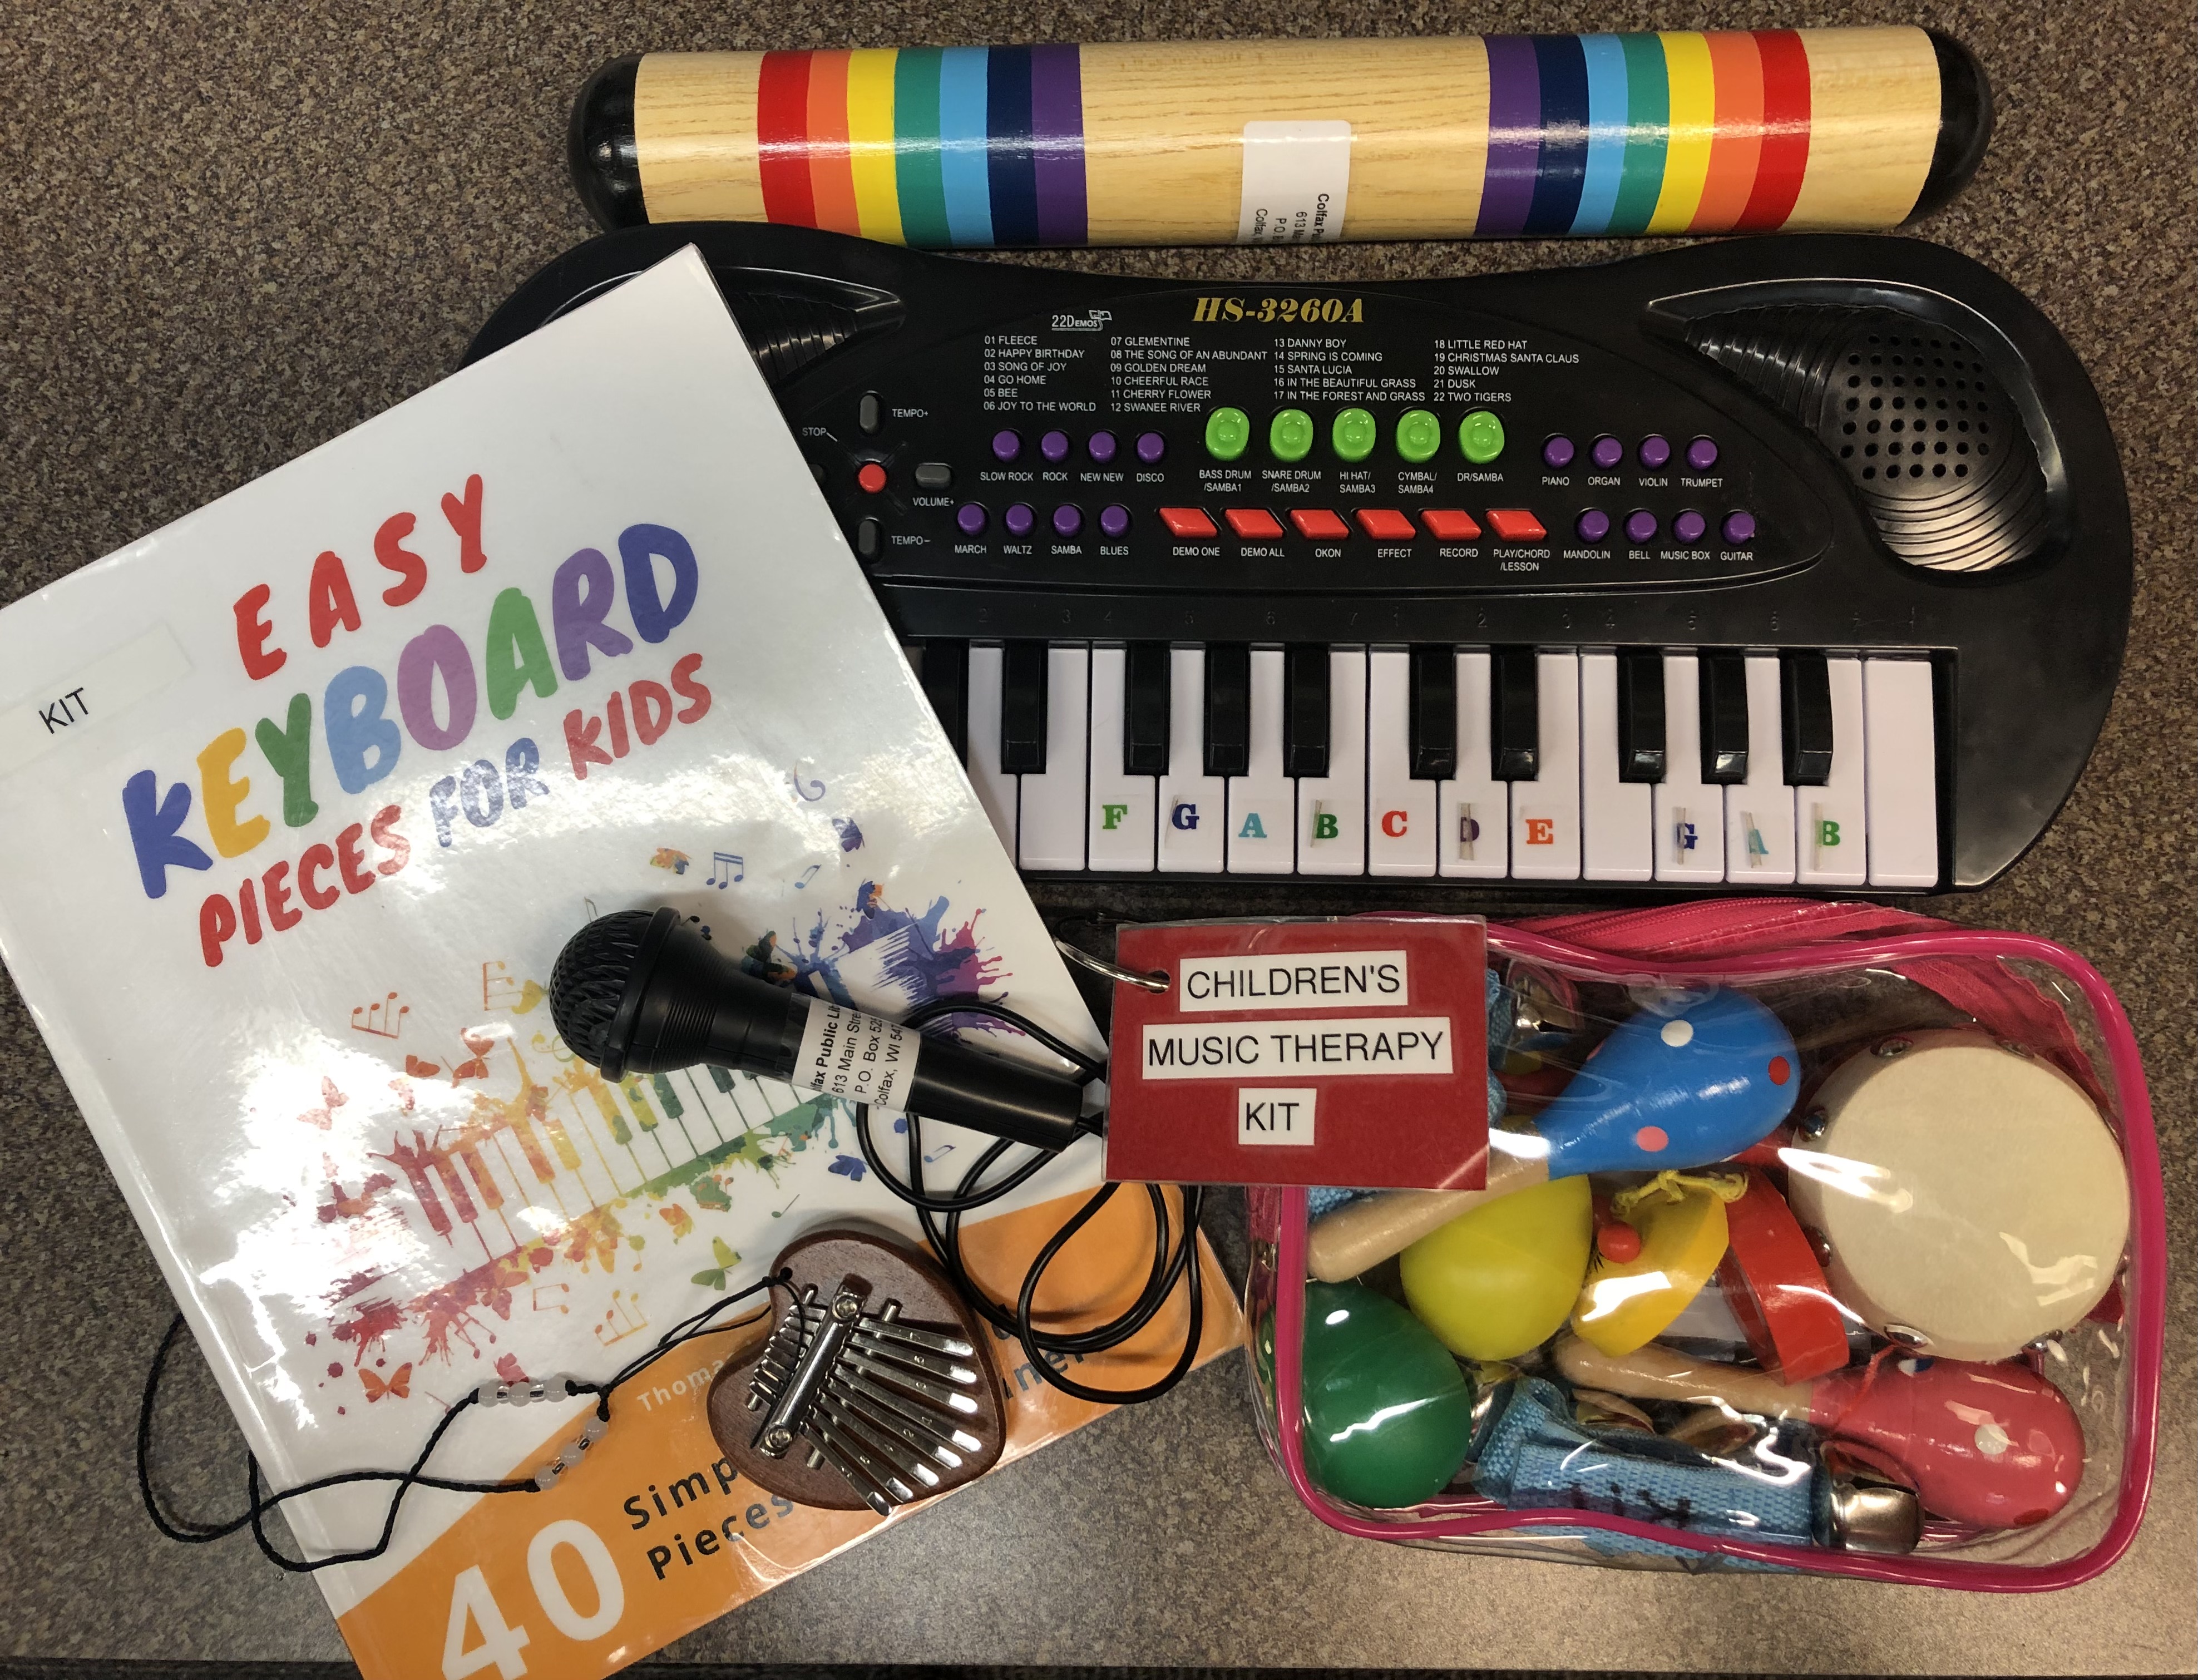 Children's Music Therapy Kit